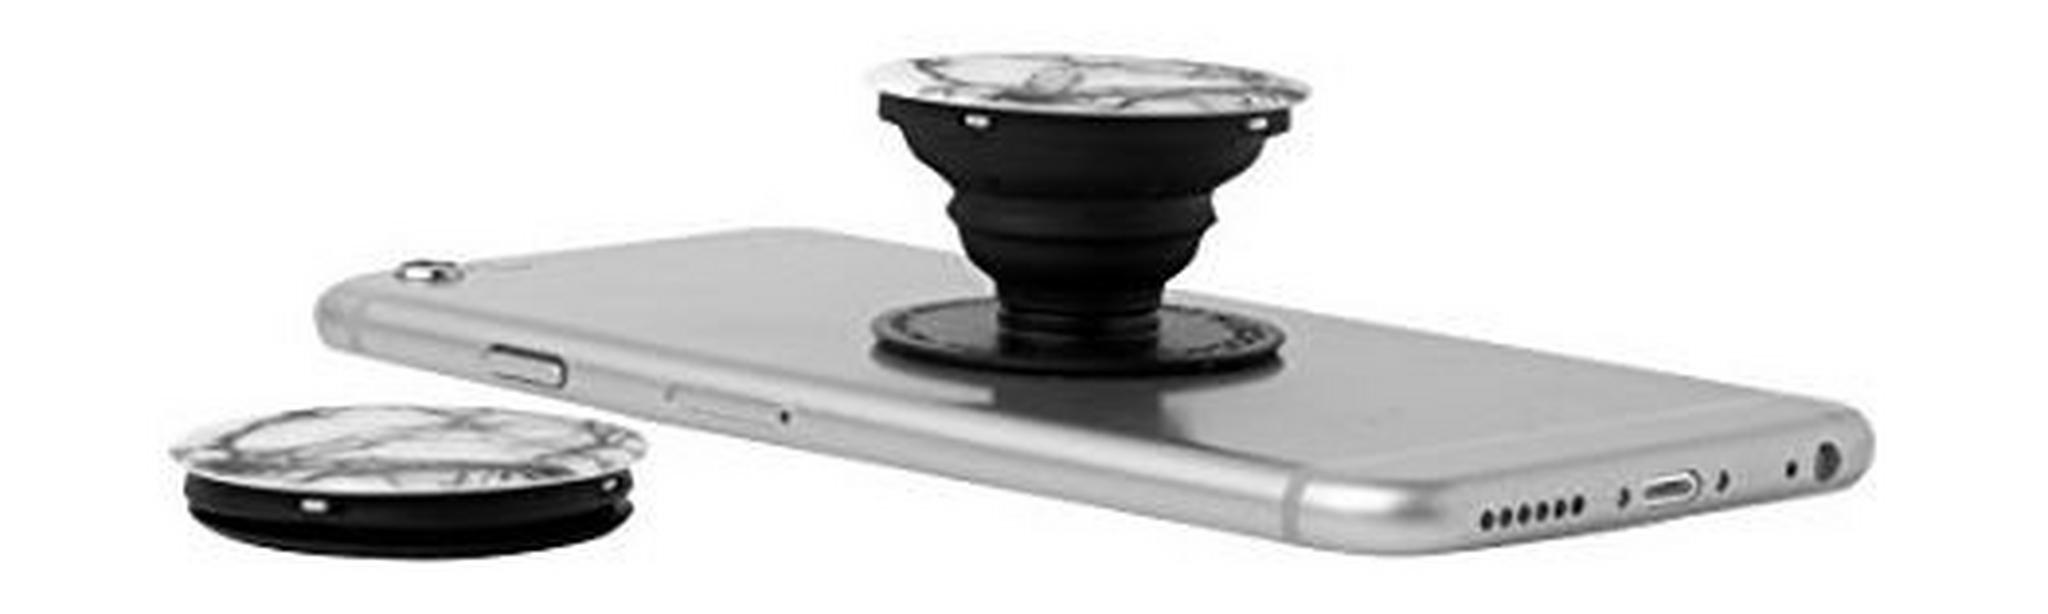 PopSocket Expanding Stand and Grip for Smartphones and Tablets – White Marble